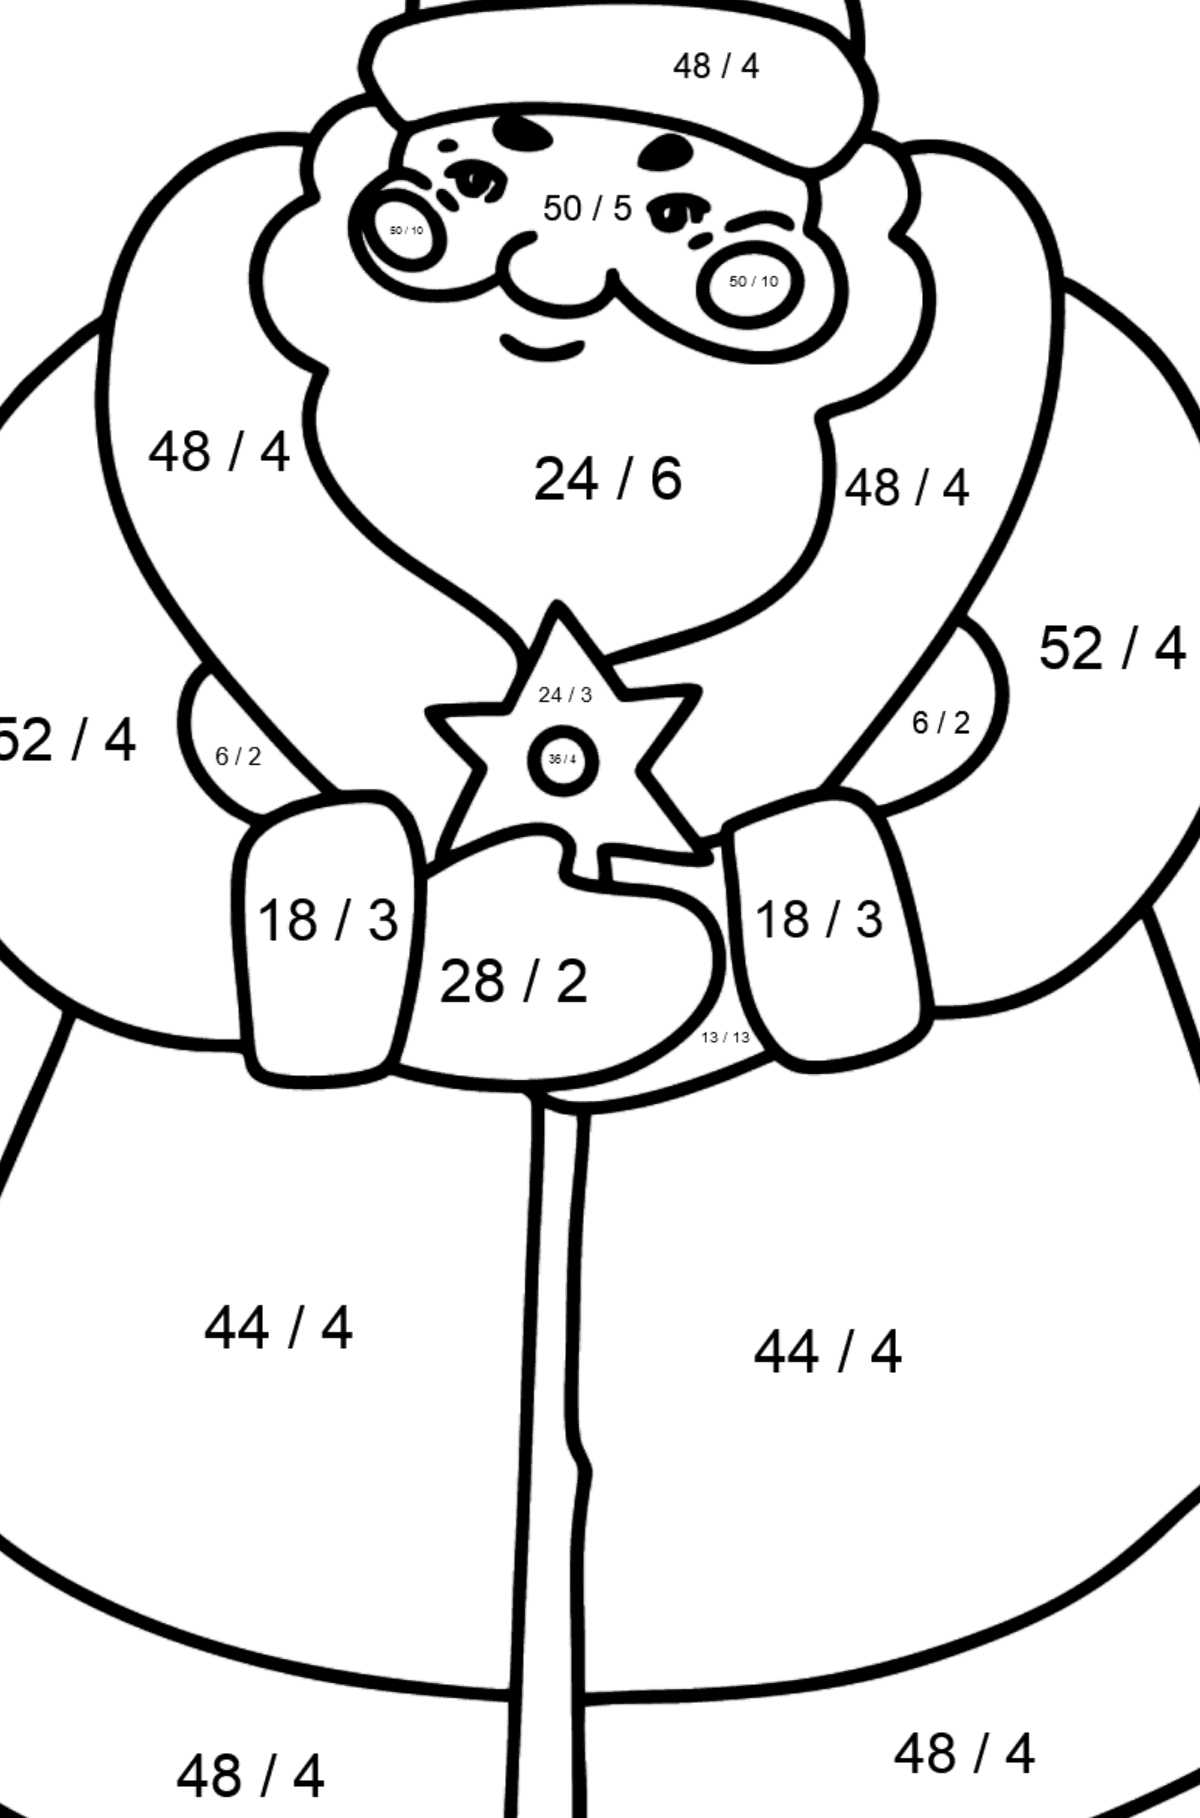 Good Father Frost coloring page - Math Coloring - Division for Kids